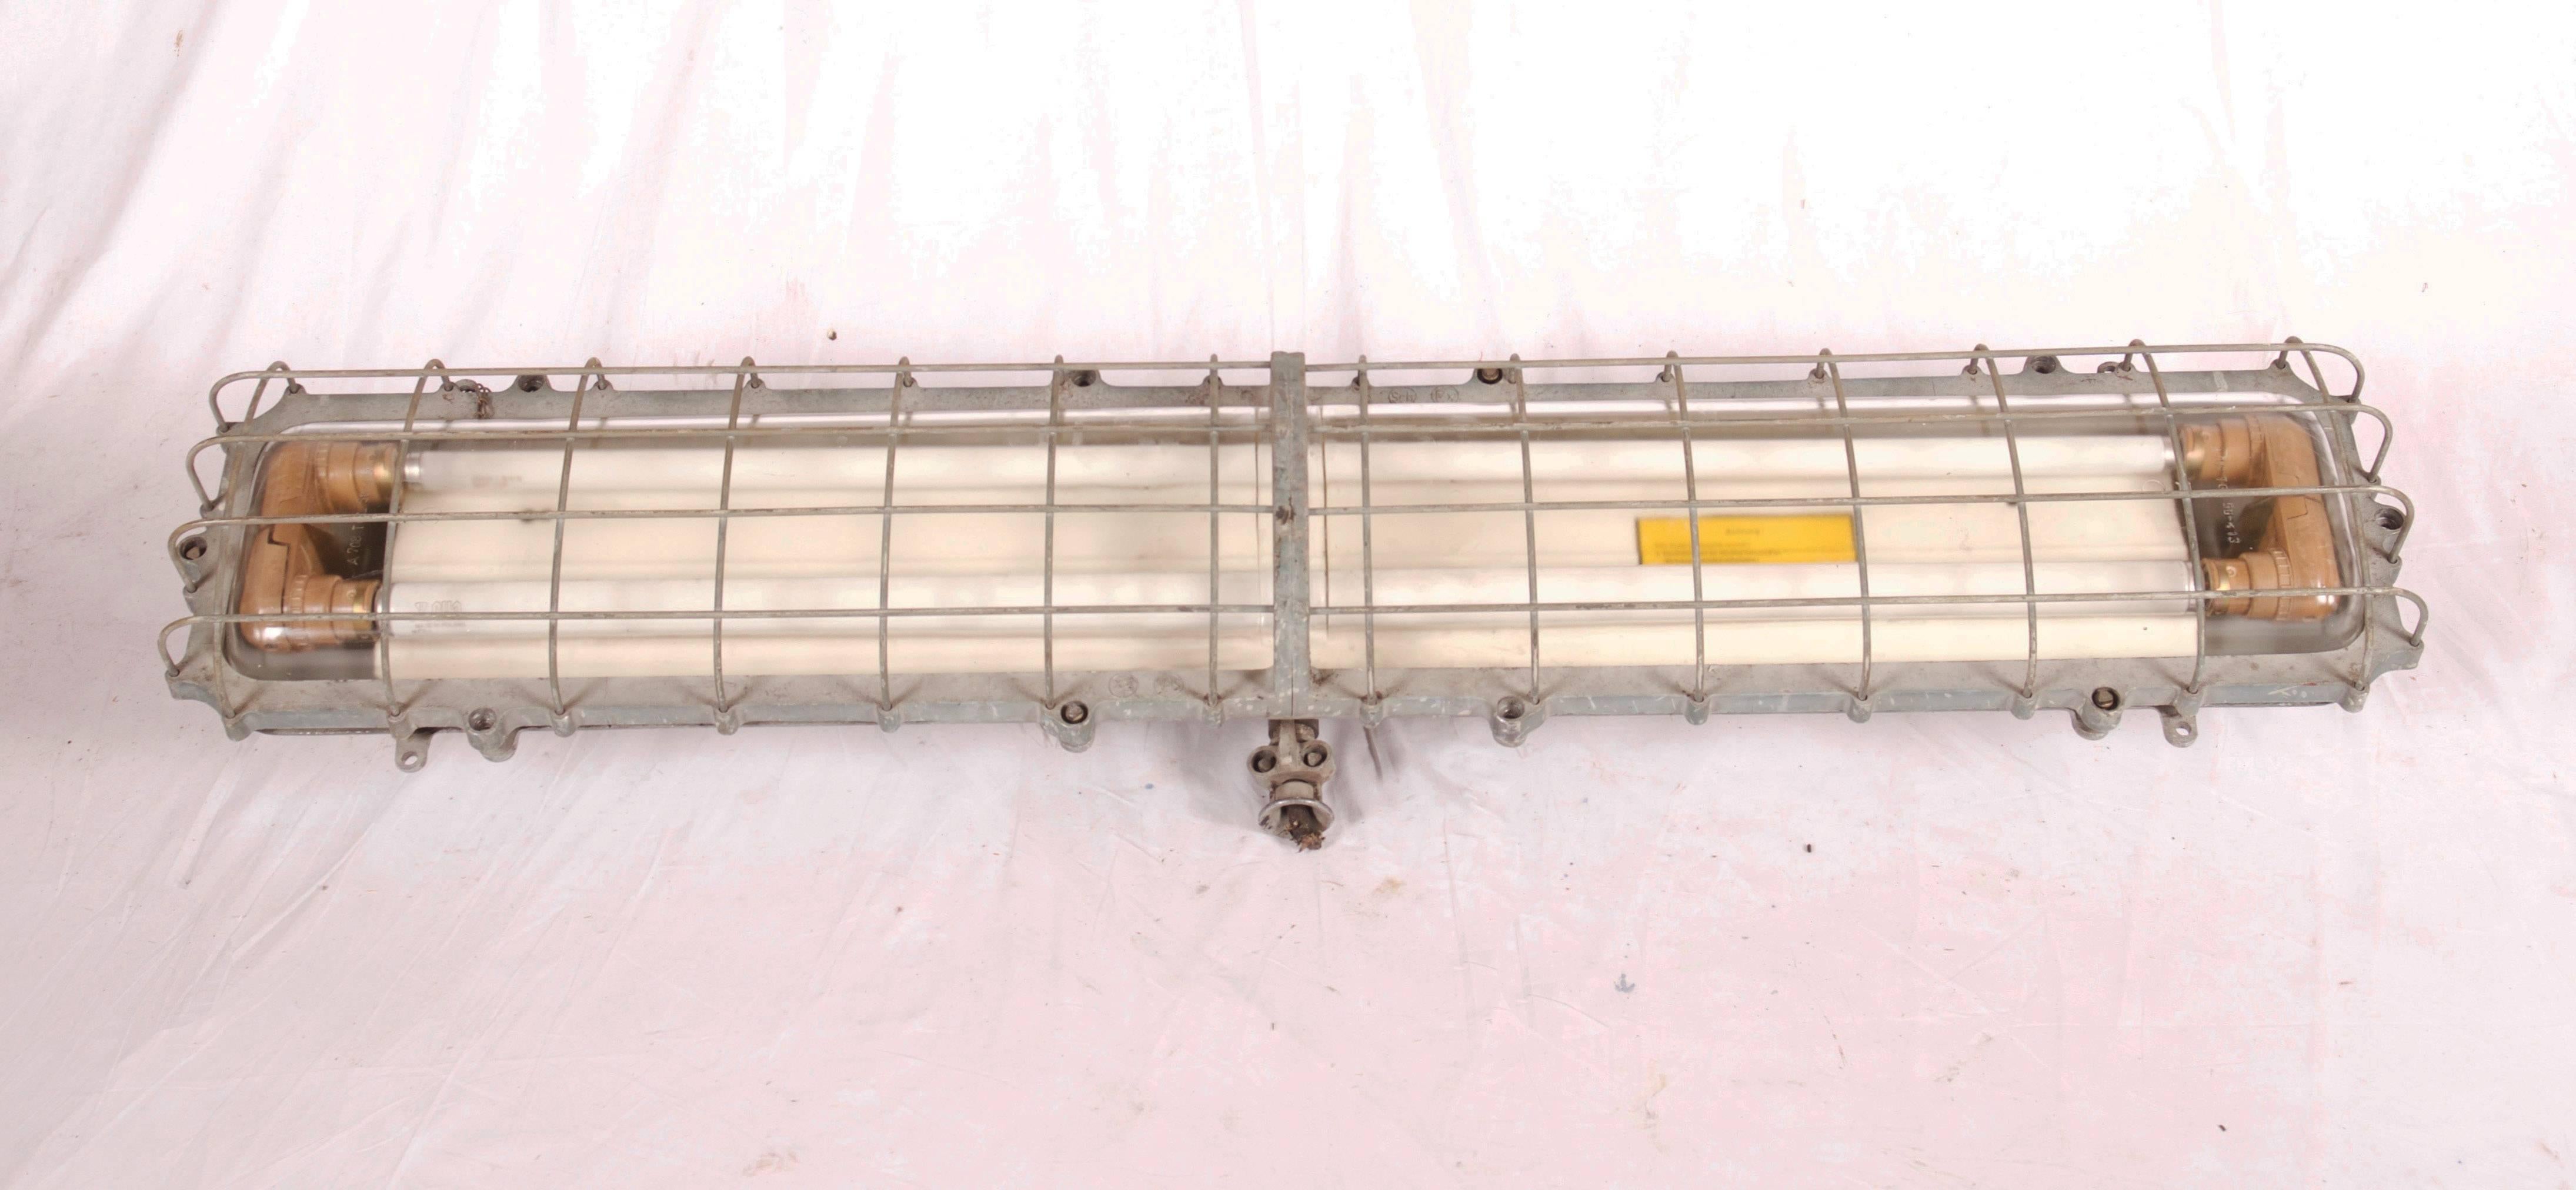 Heavy cast iron with glass and steel grid made in Germany in the 1970s.
Powered with two 120 cm (47,24inches) long tube lights.